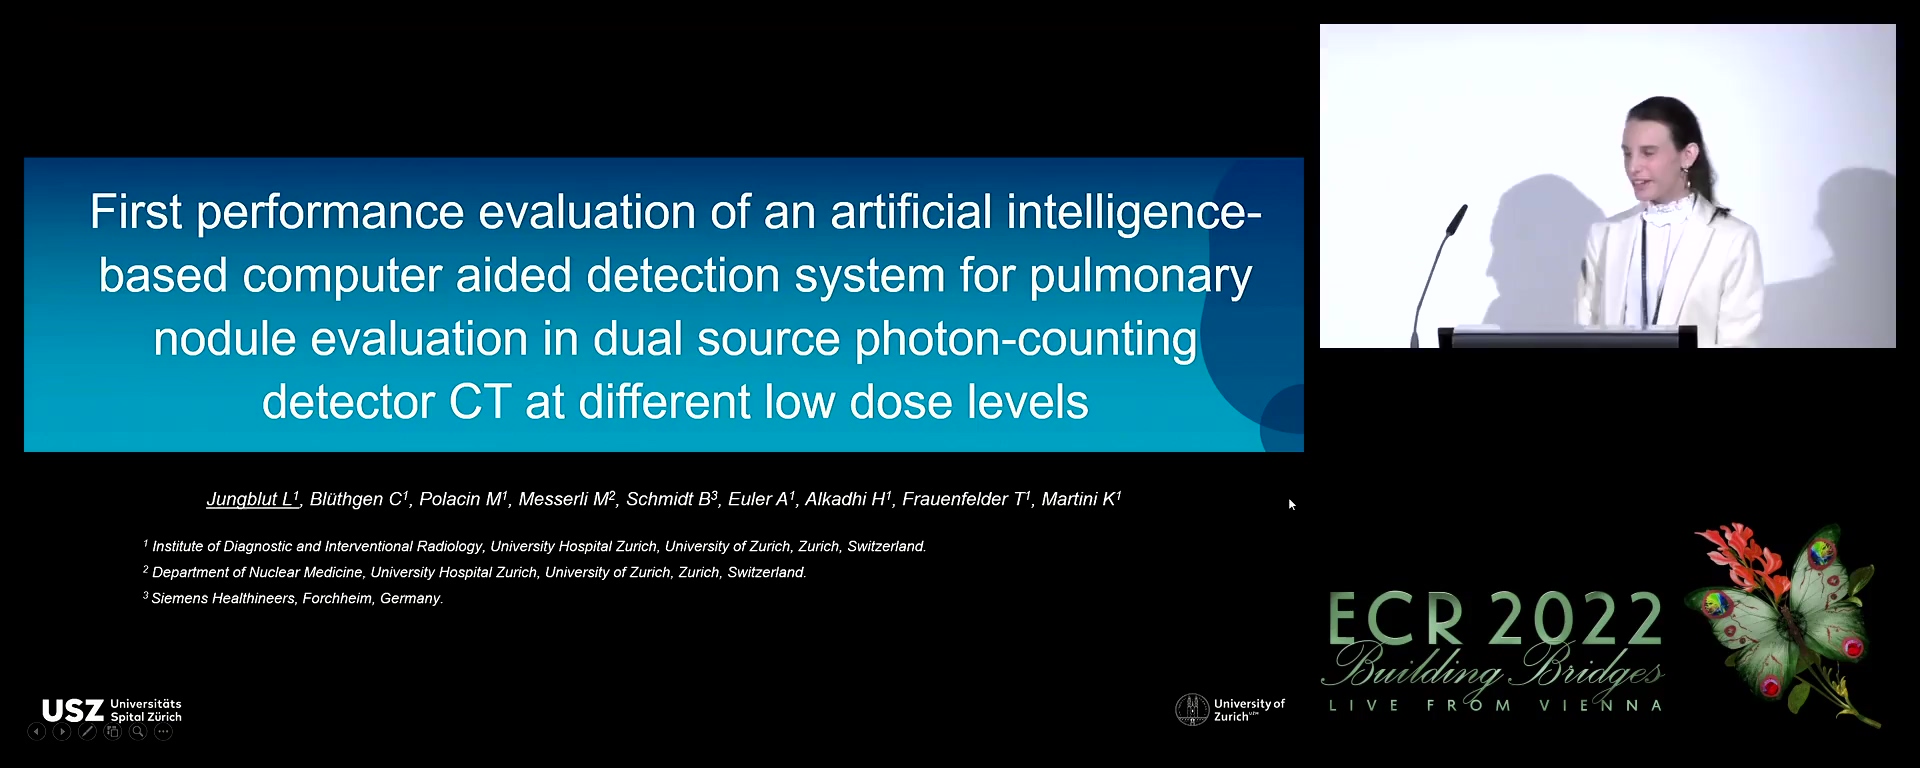 First performance evaluation of an artificial intelligence-based computer aided detection system for pulmonary nodule evaluation in dual source photon-counting detector CT at different low dose levels